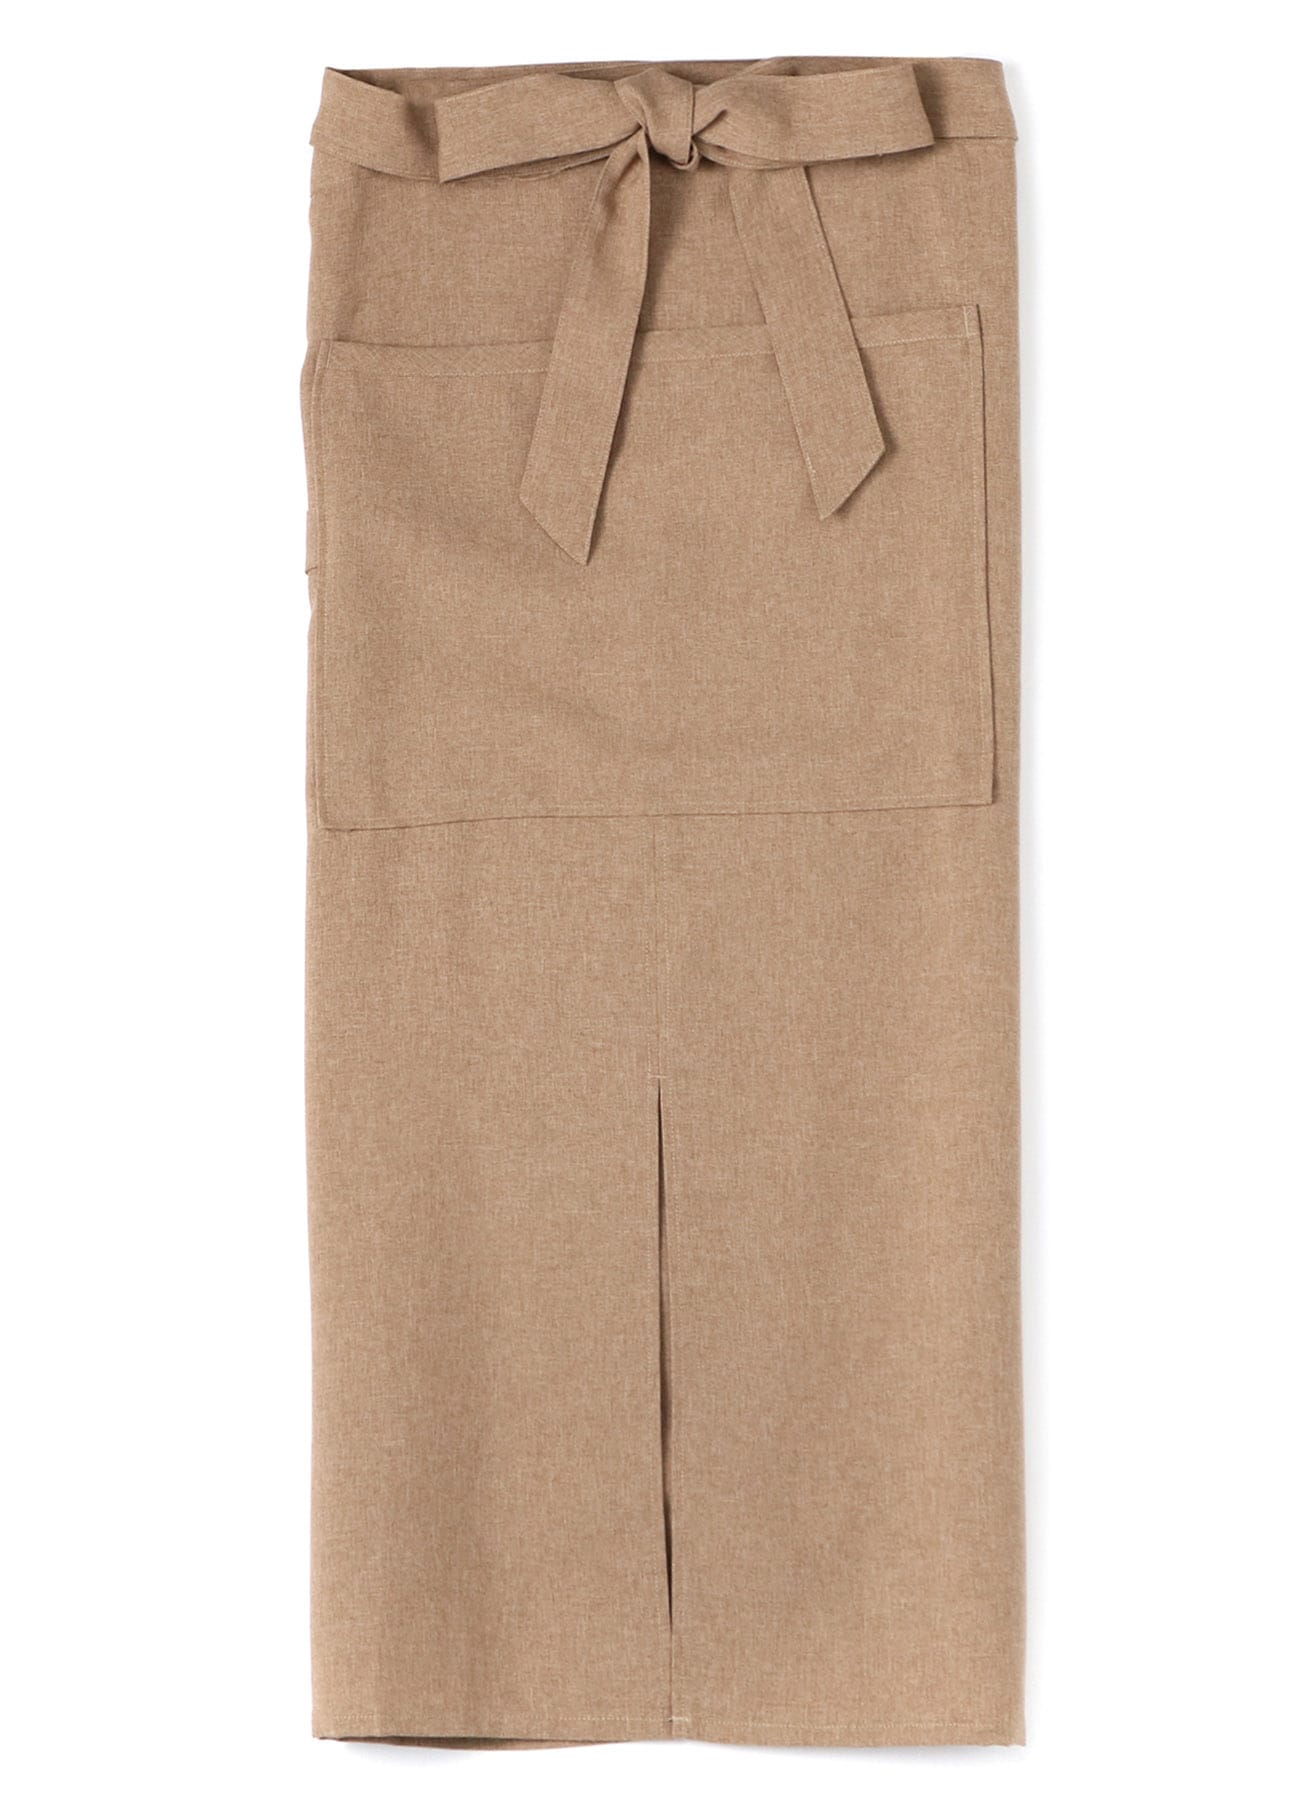 POLYESTER CHAMBRAY SOMMELIER APRON